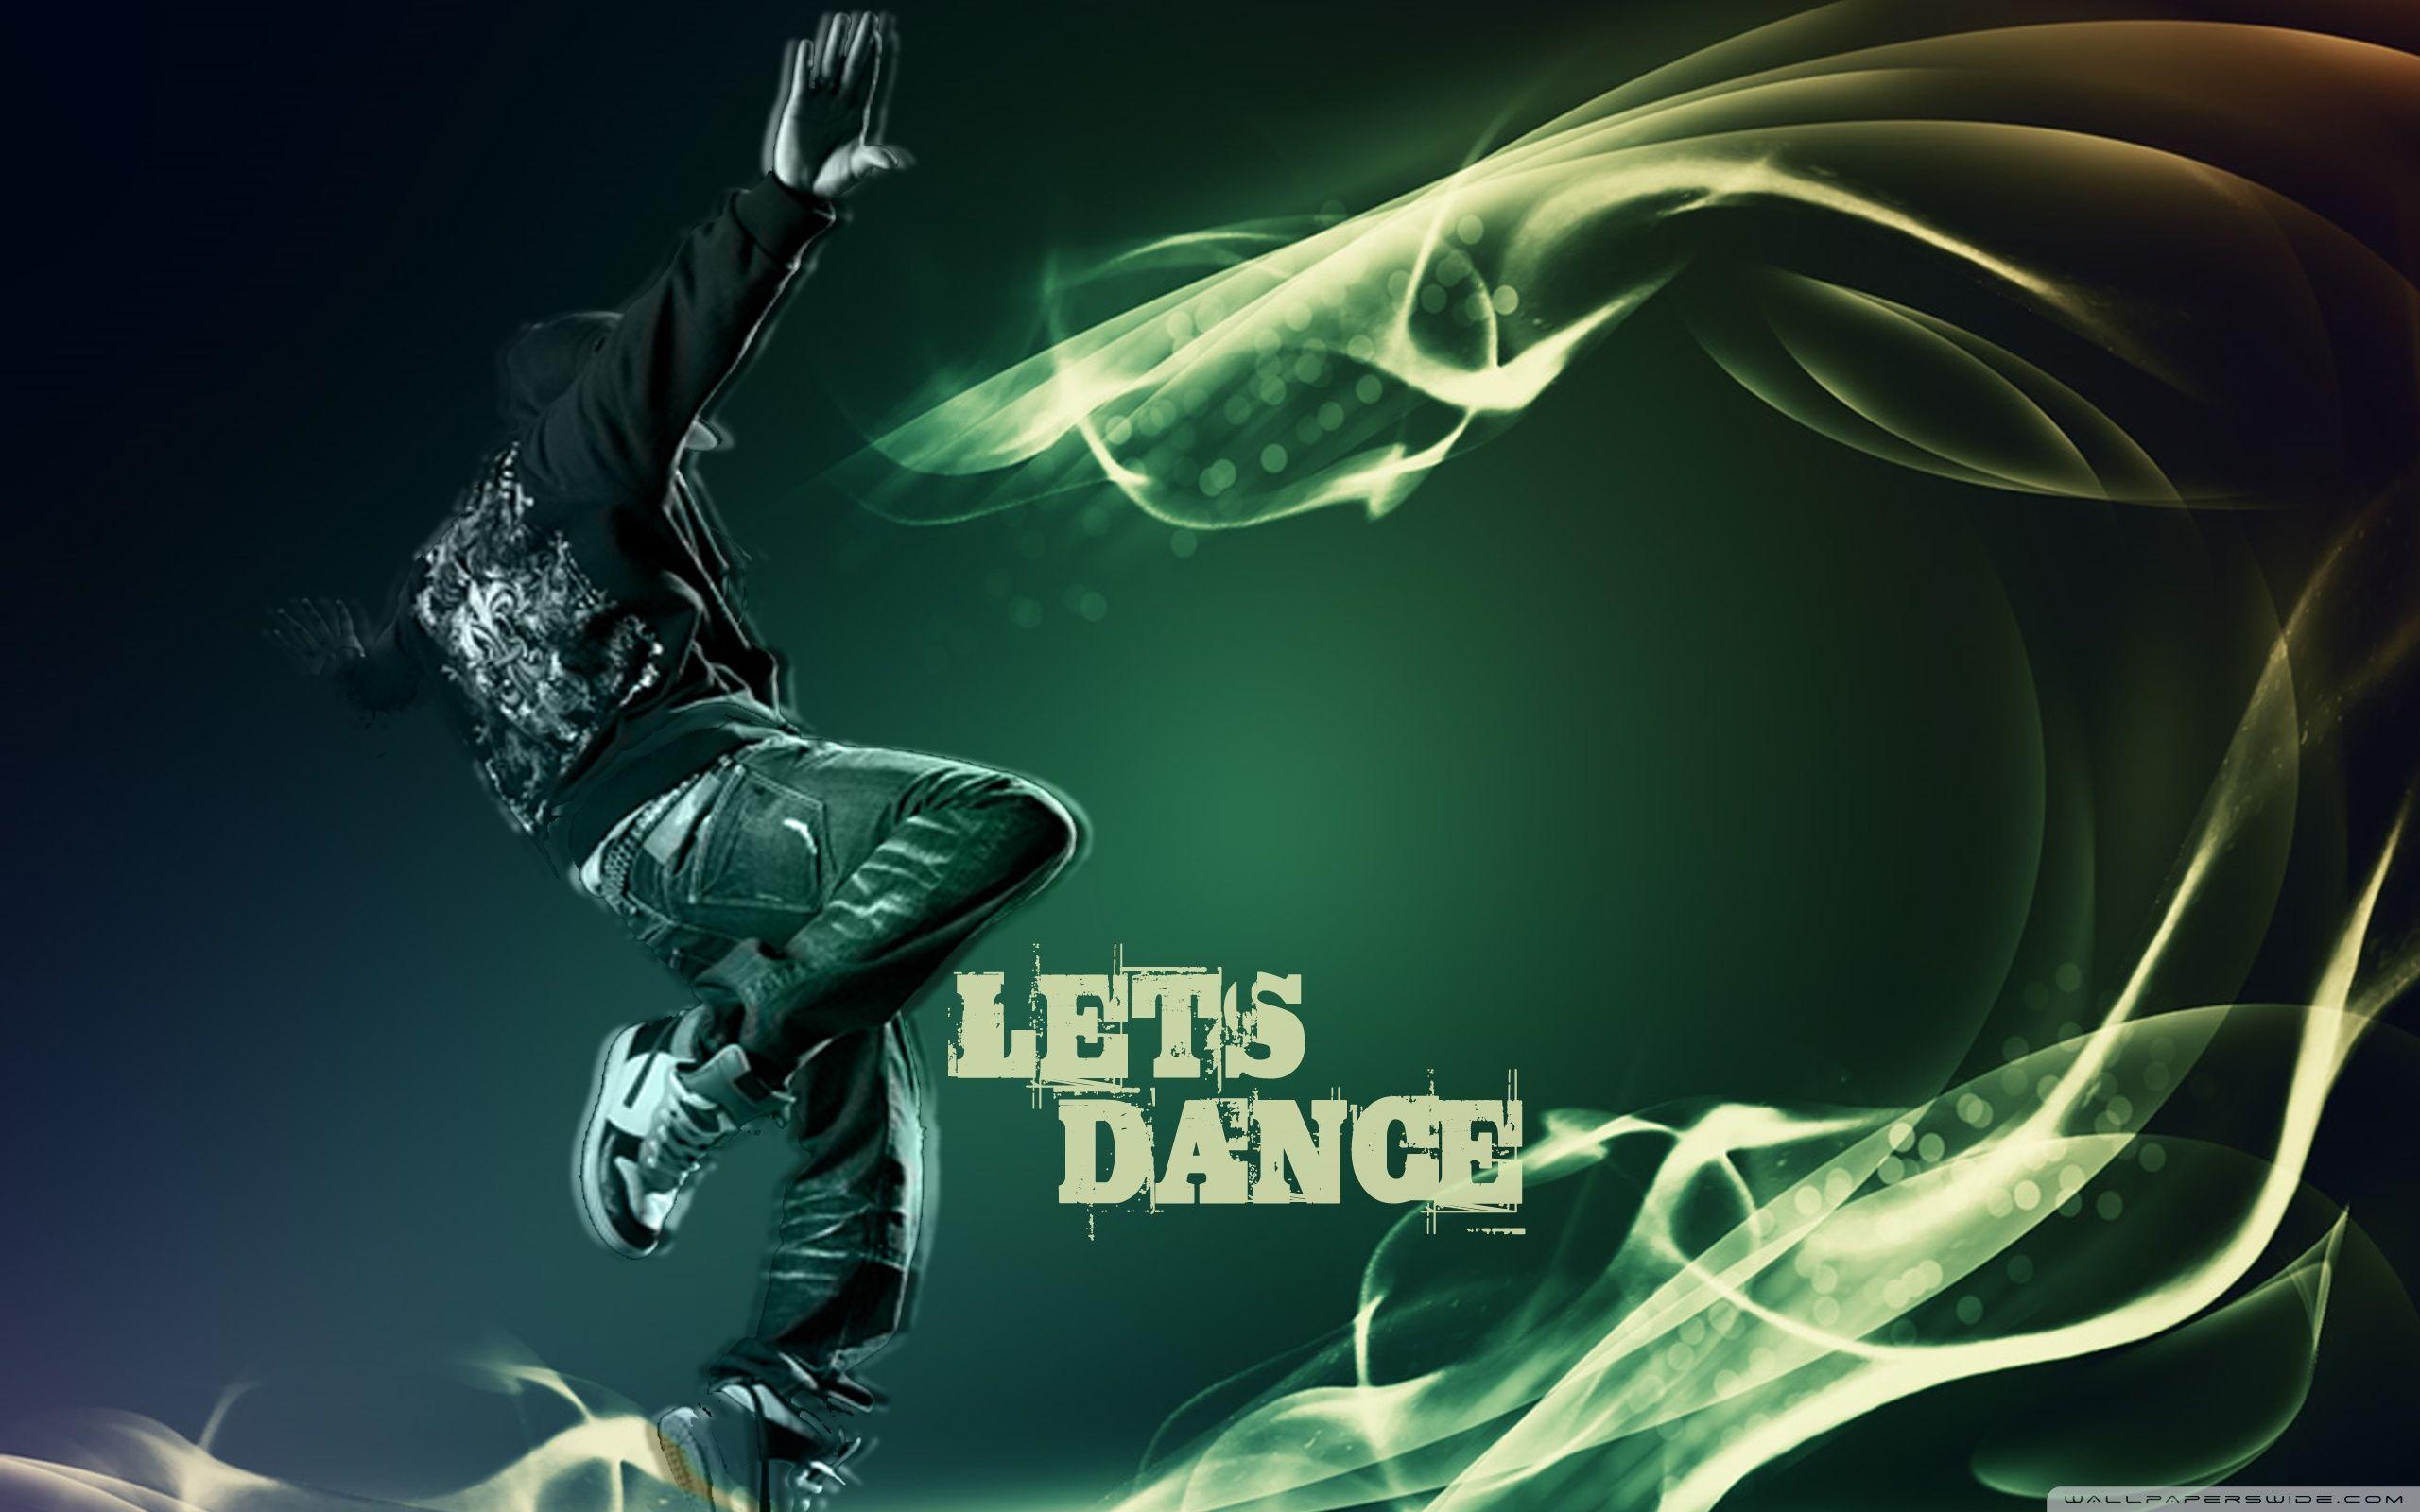 Dance wallpaper HD free Android Apps on Google Play. HD Wallpaper